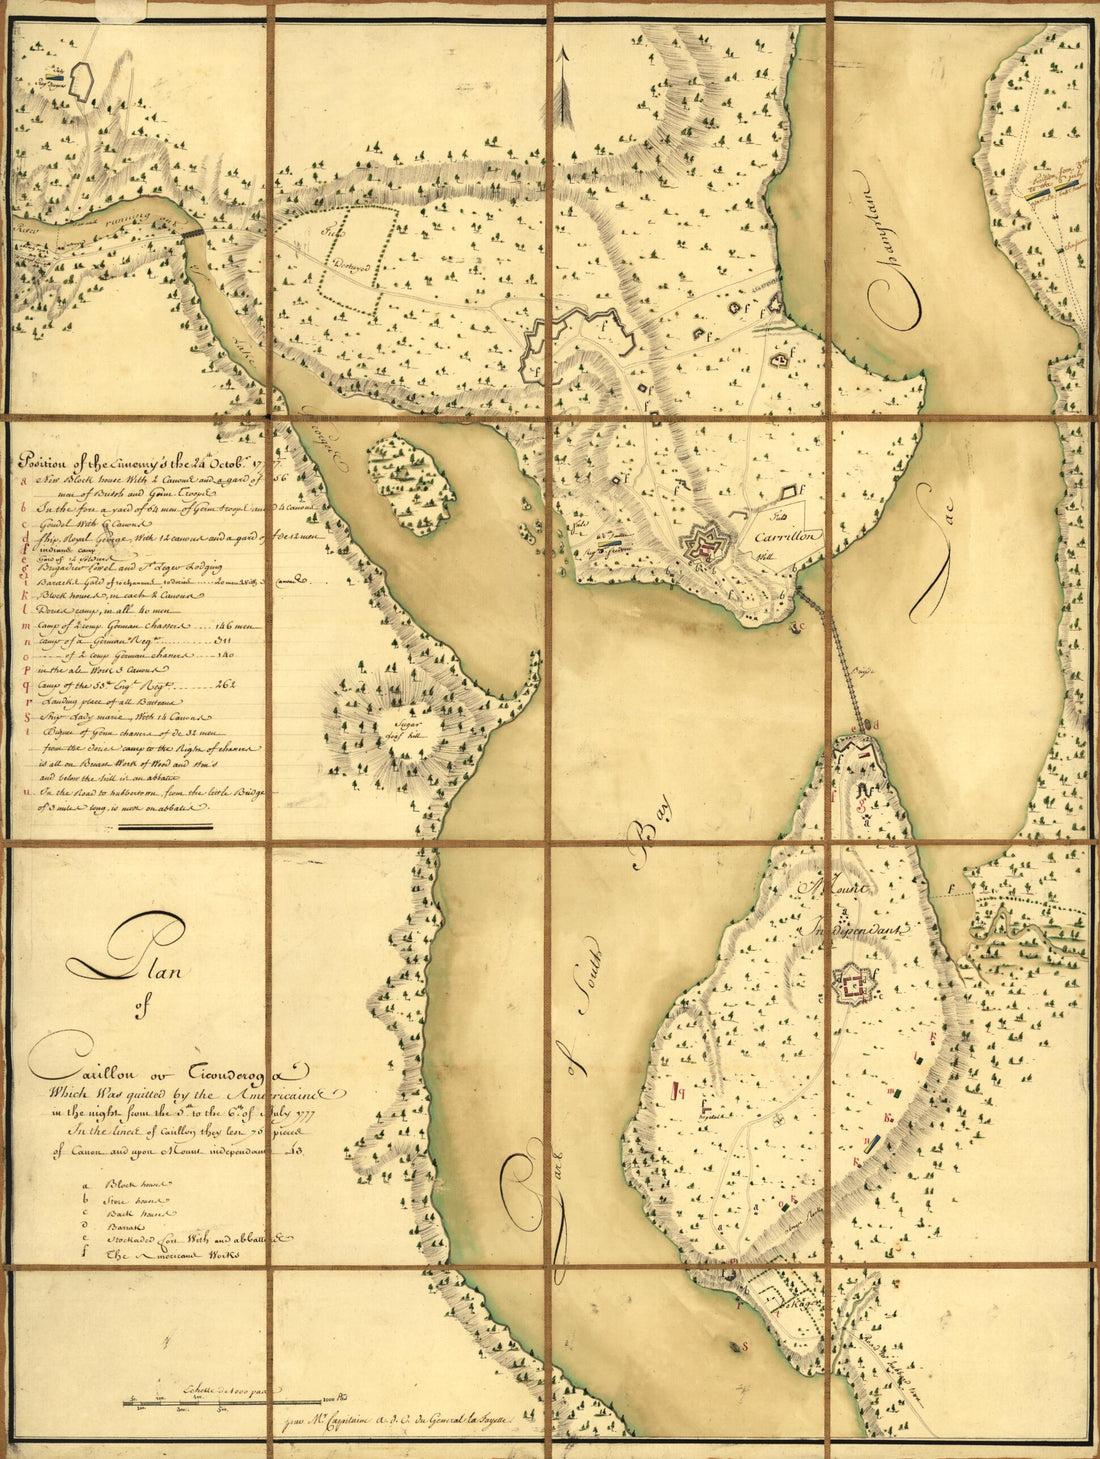 This old map of Plan of Carillon Ou sic Ticonderoga : Which Was Quitted by the Americaines In the Night from the 5th to the 6th of July from 1777 (Plan of Carillon Or Ticonderoga, Position De L&